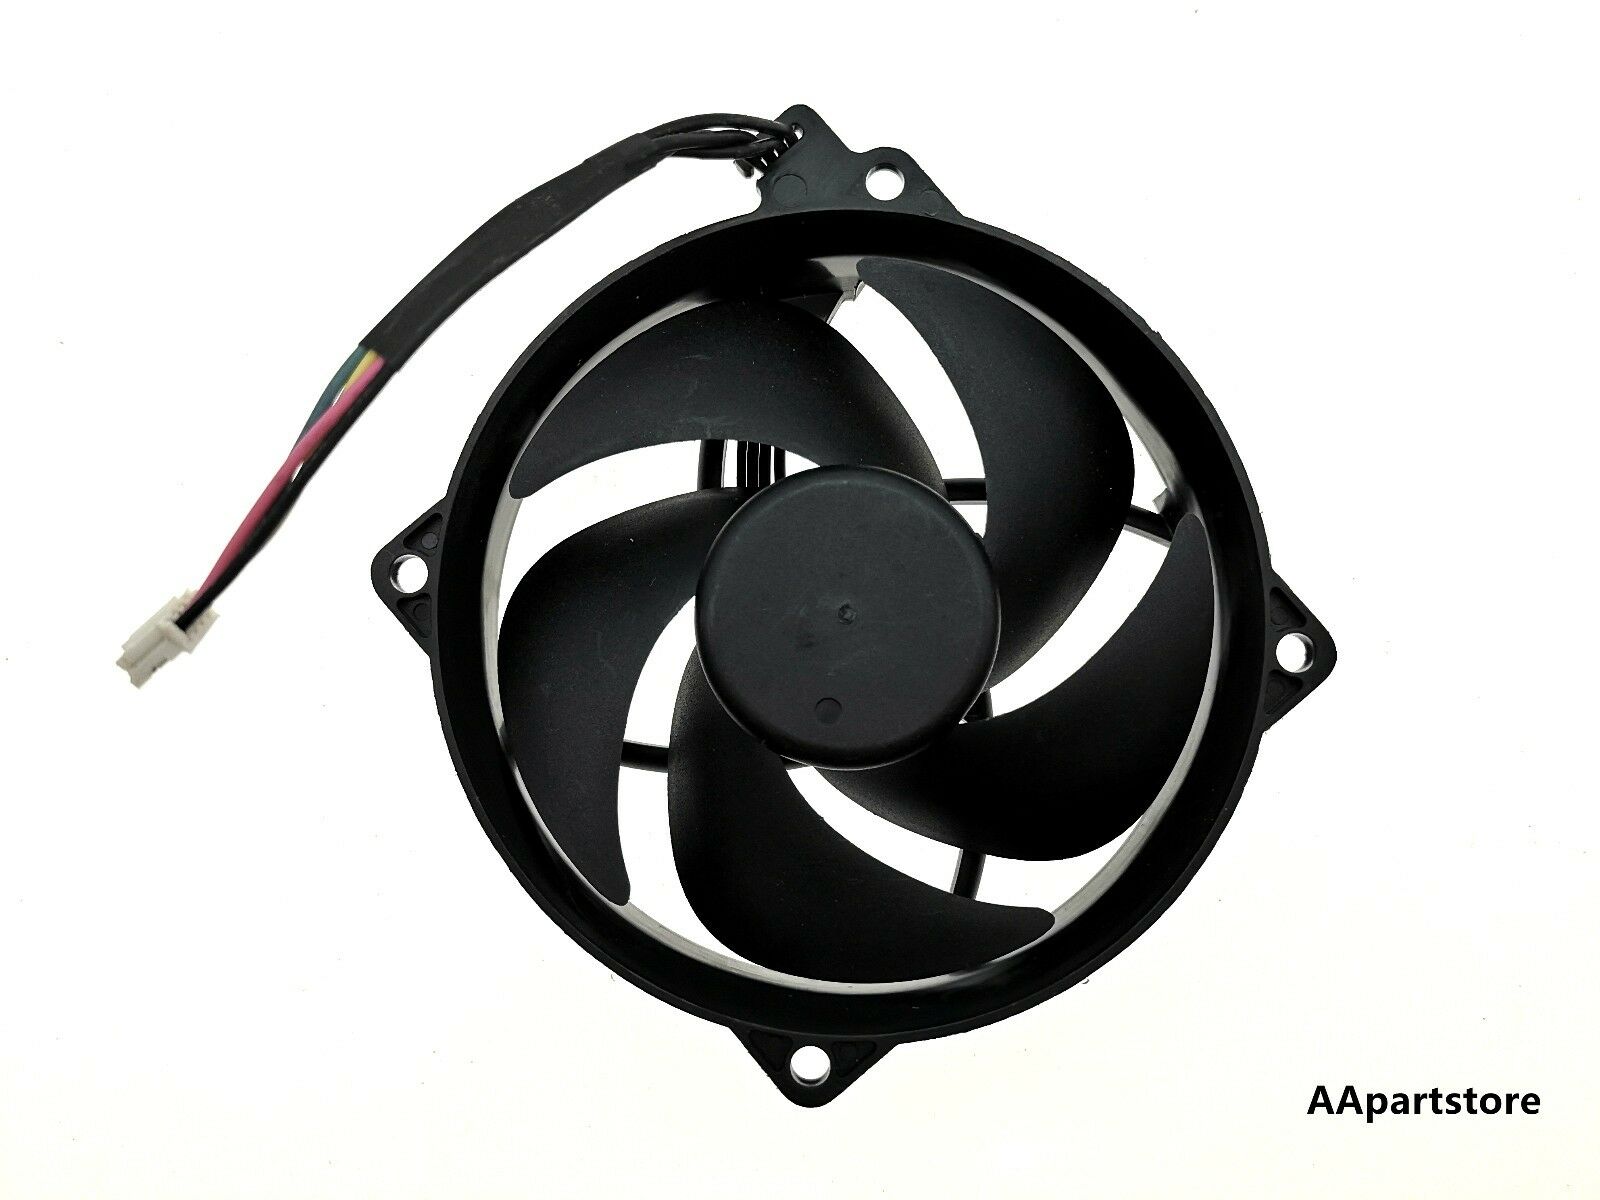 Internal Cooling Fan For Xbox 360 Slim Original Replacement Usa Seller